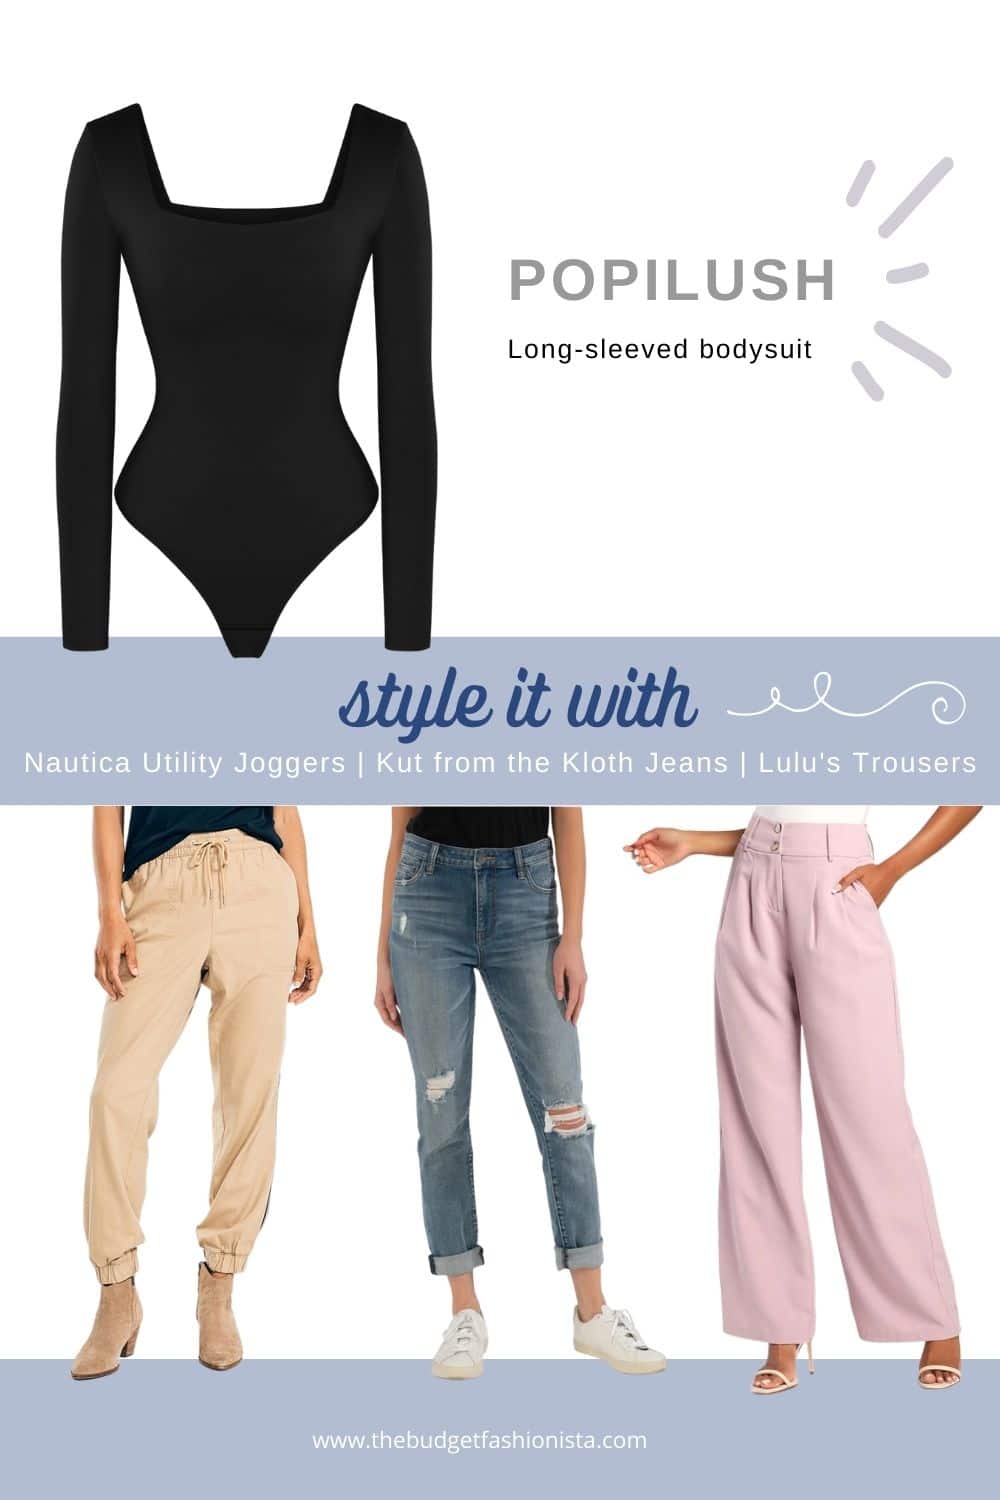 Outfit collage showing how to style a bodysuit with joggers, jeans, or trousers.